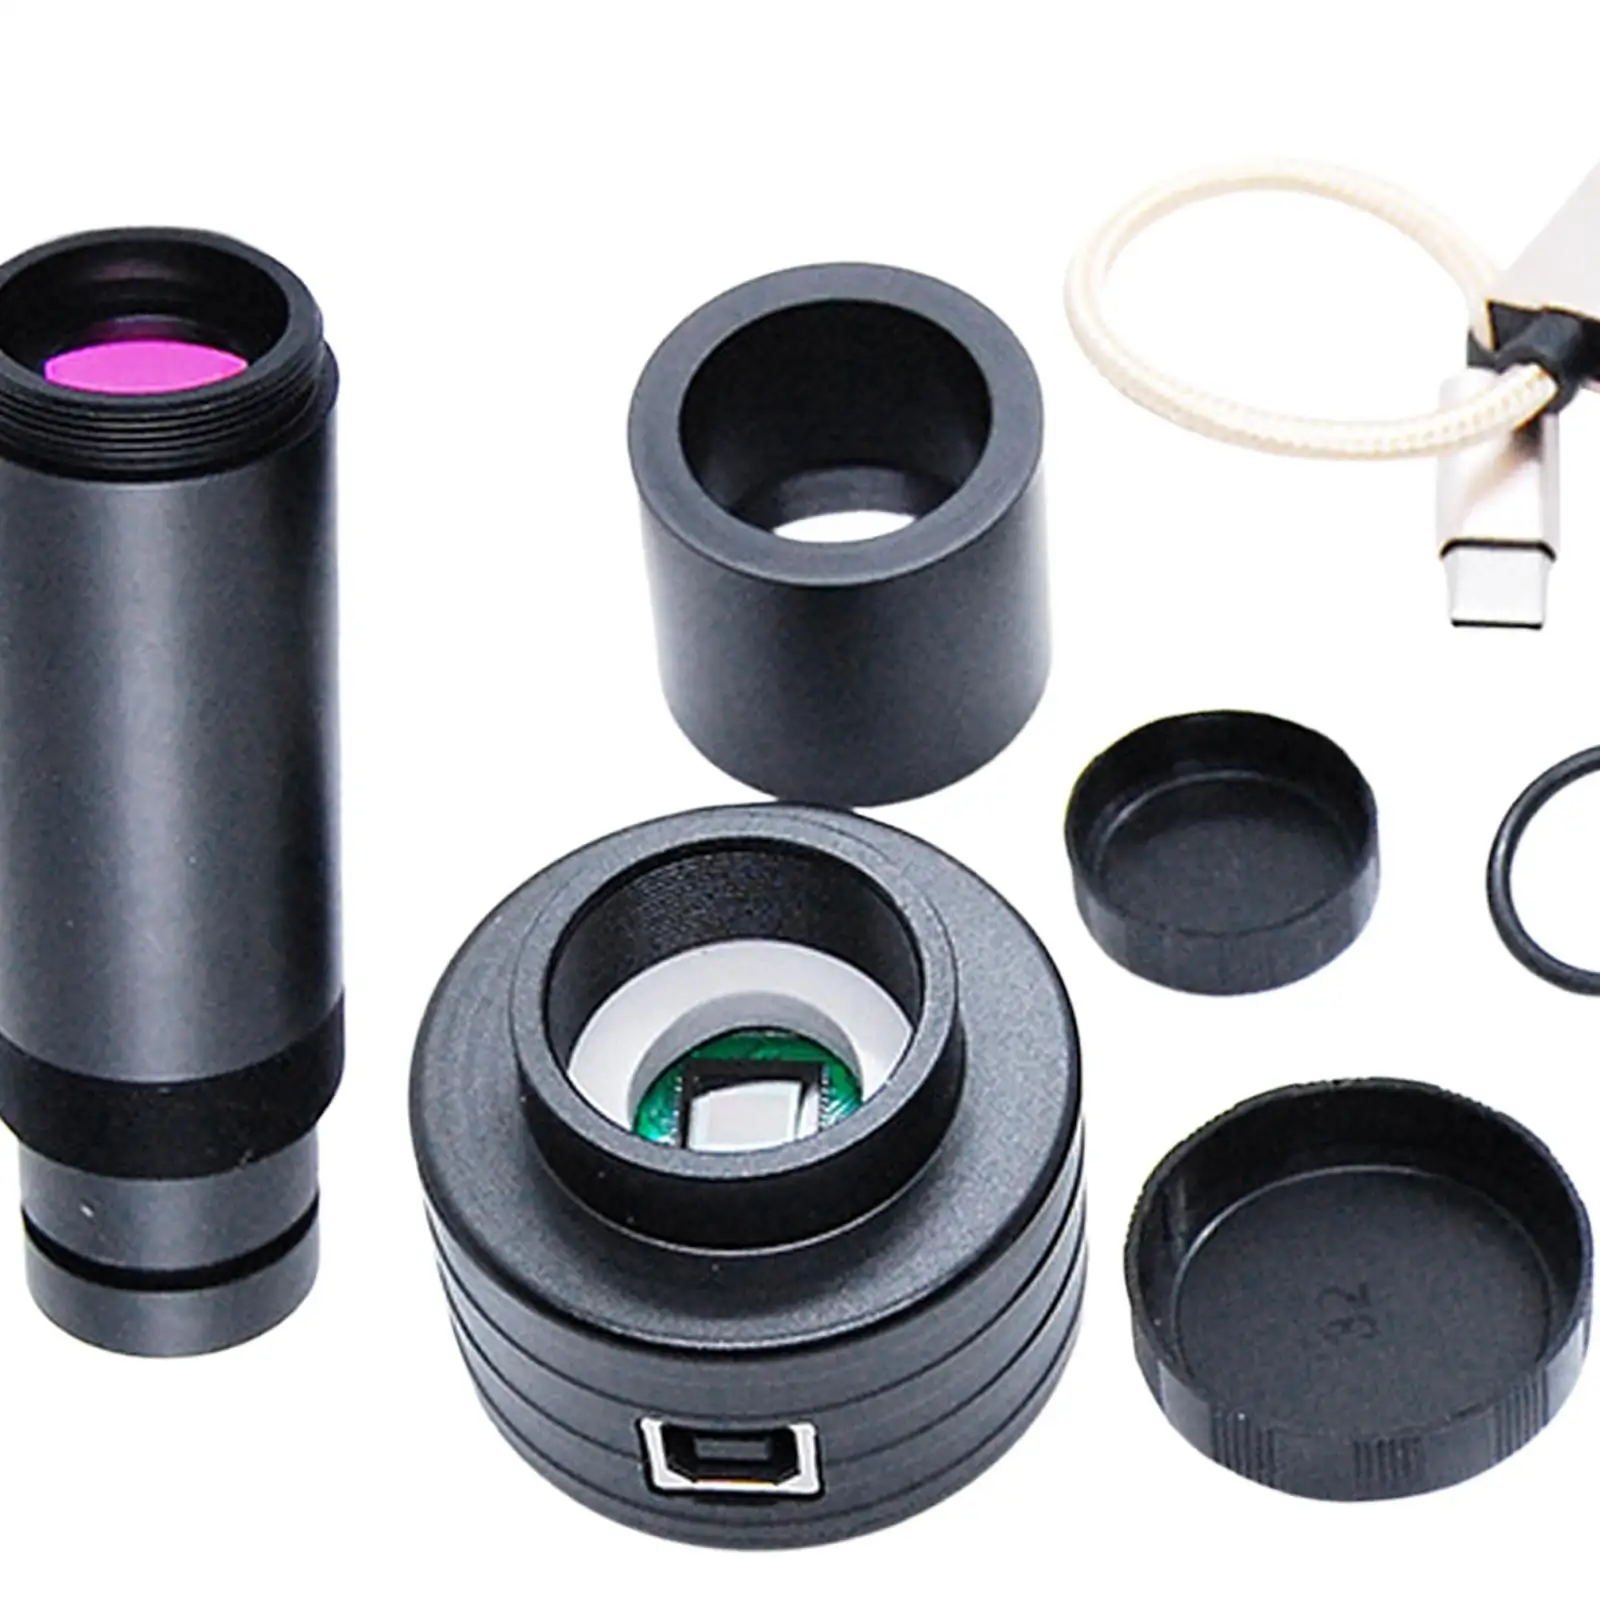 Electronic Eyepiece for Beginners for 1.25 Inches Astronomy Camera Accessory